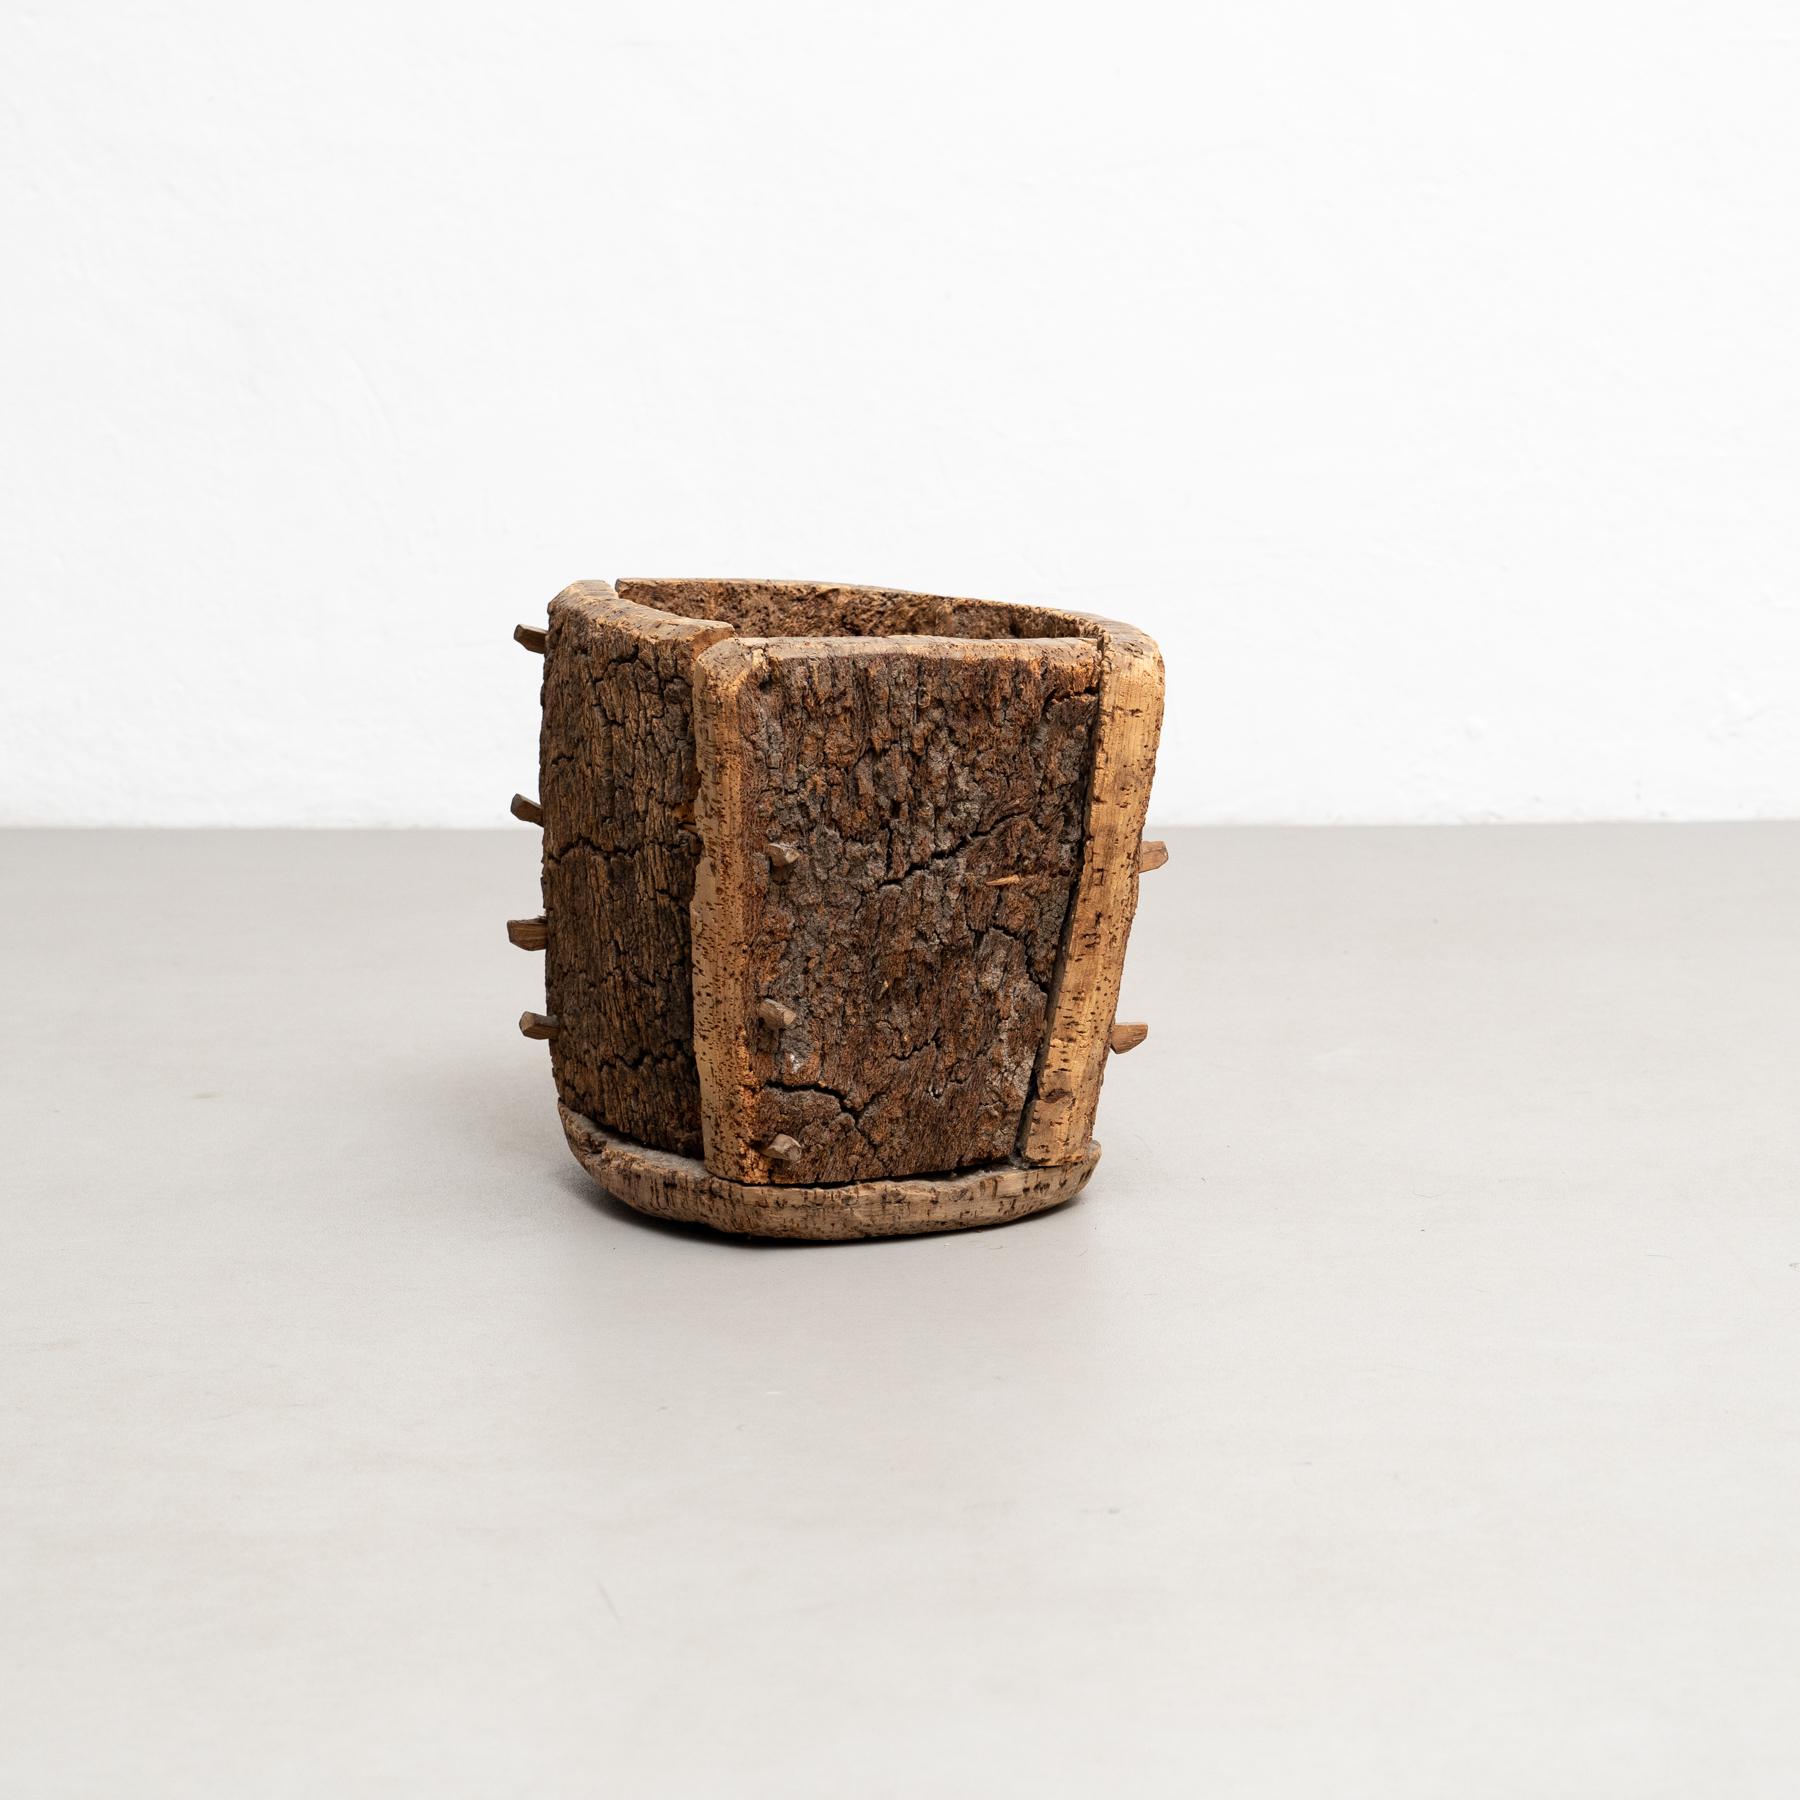 Mid-Century Modern Brutalist Charm: Early 20th Century Cork Trash Bin with Time-Worn Charachter